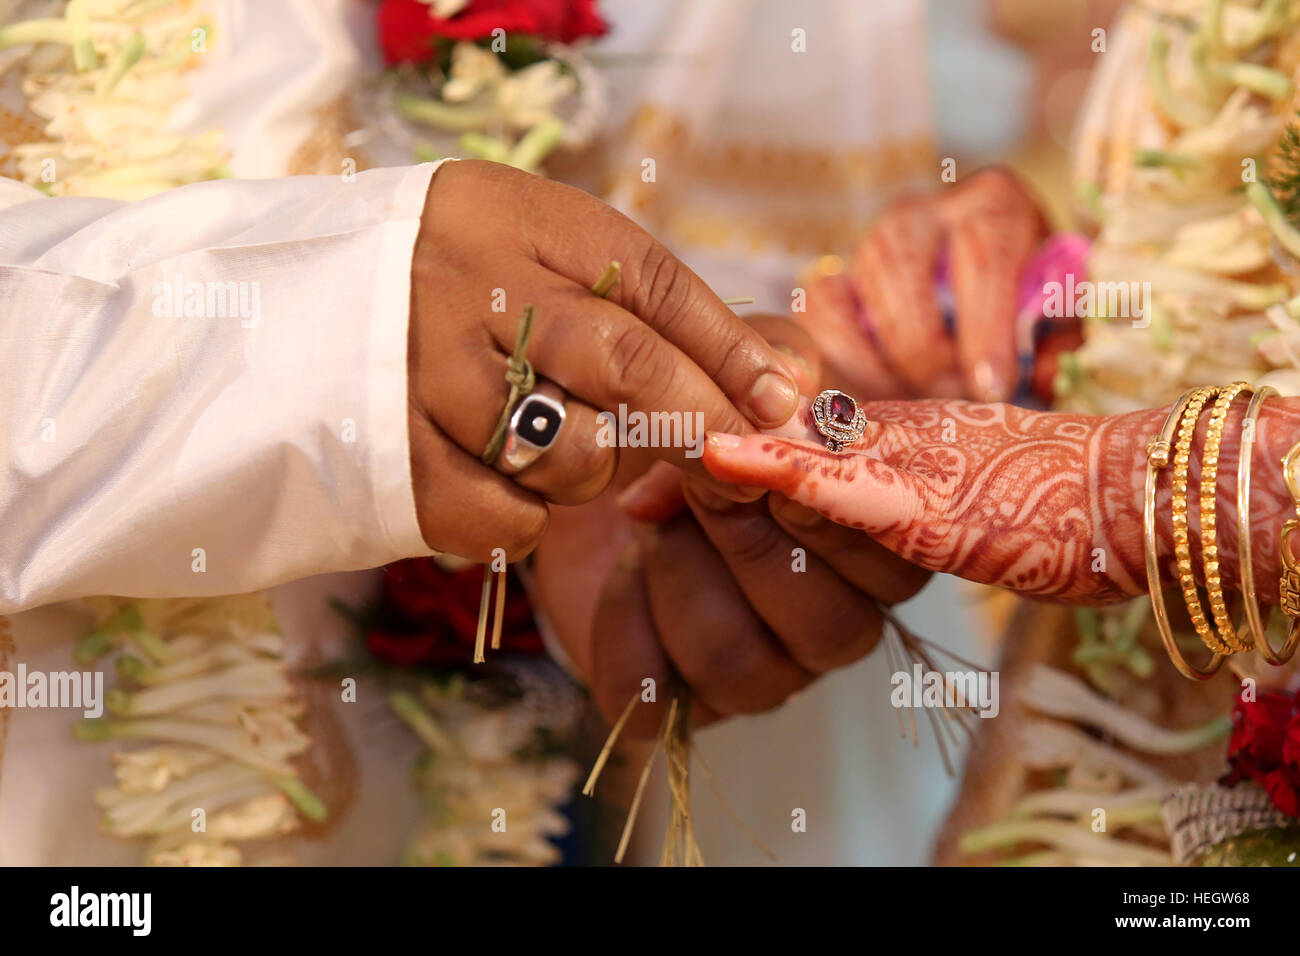 Engagement Ring Ceremony' – One Common Custom Of Indians | INNLIVE NETWORK